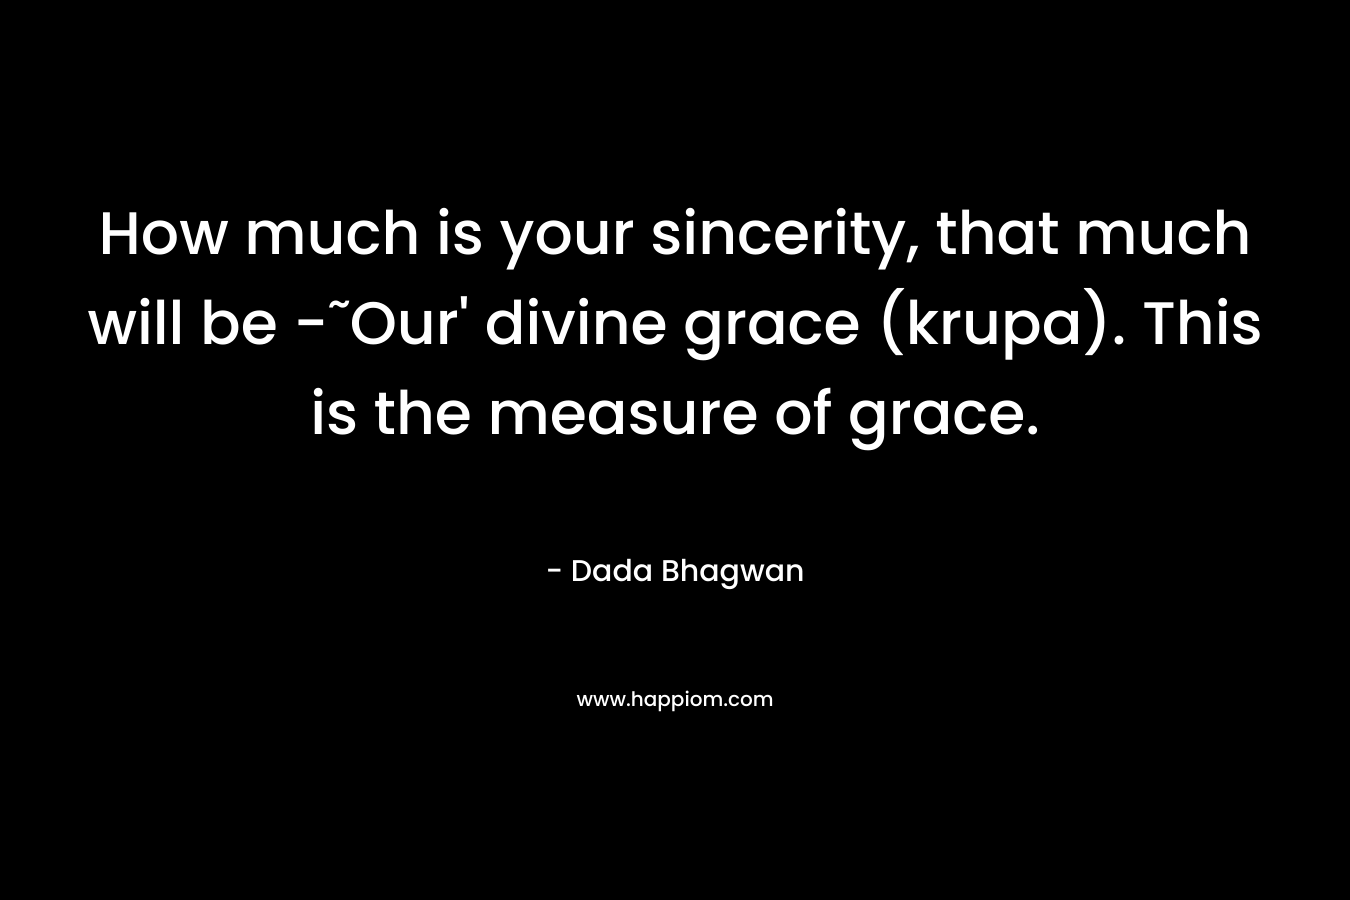 How much is your sincerity, that much will be -˜Our’ divine grace (krupa). This is the measure of grace. – Dada Bhagwan